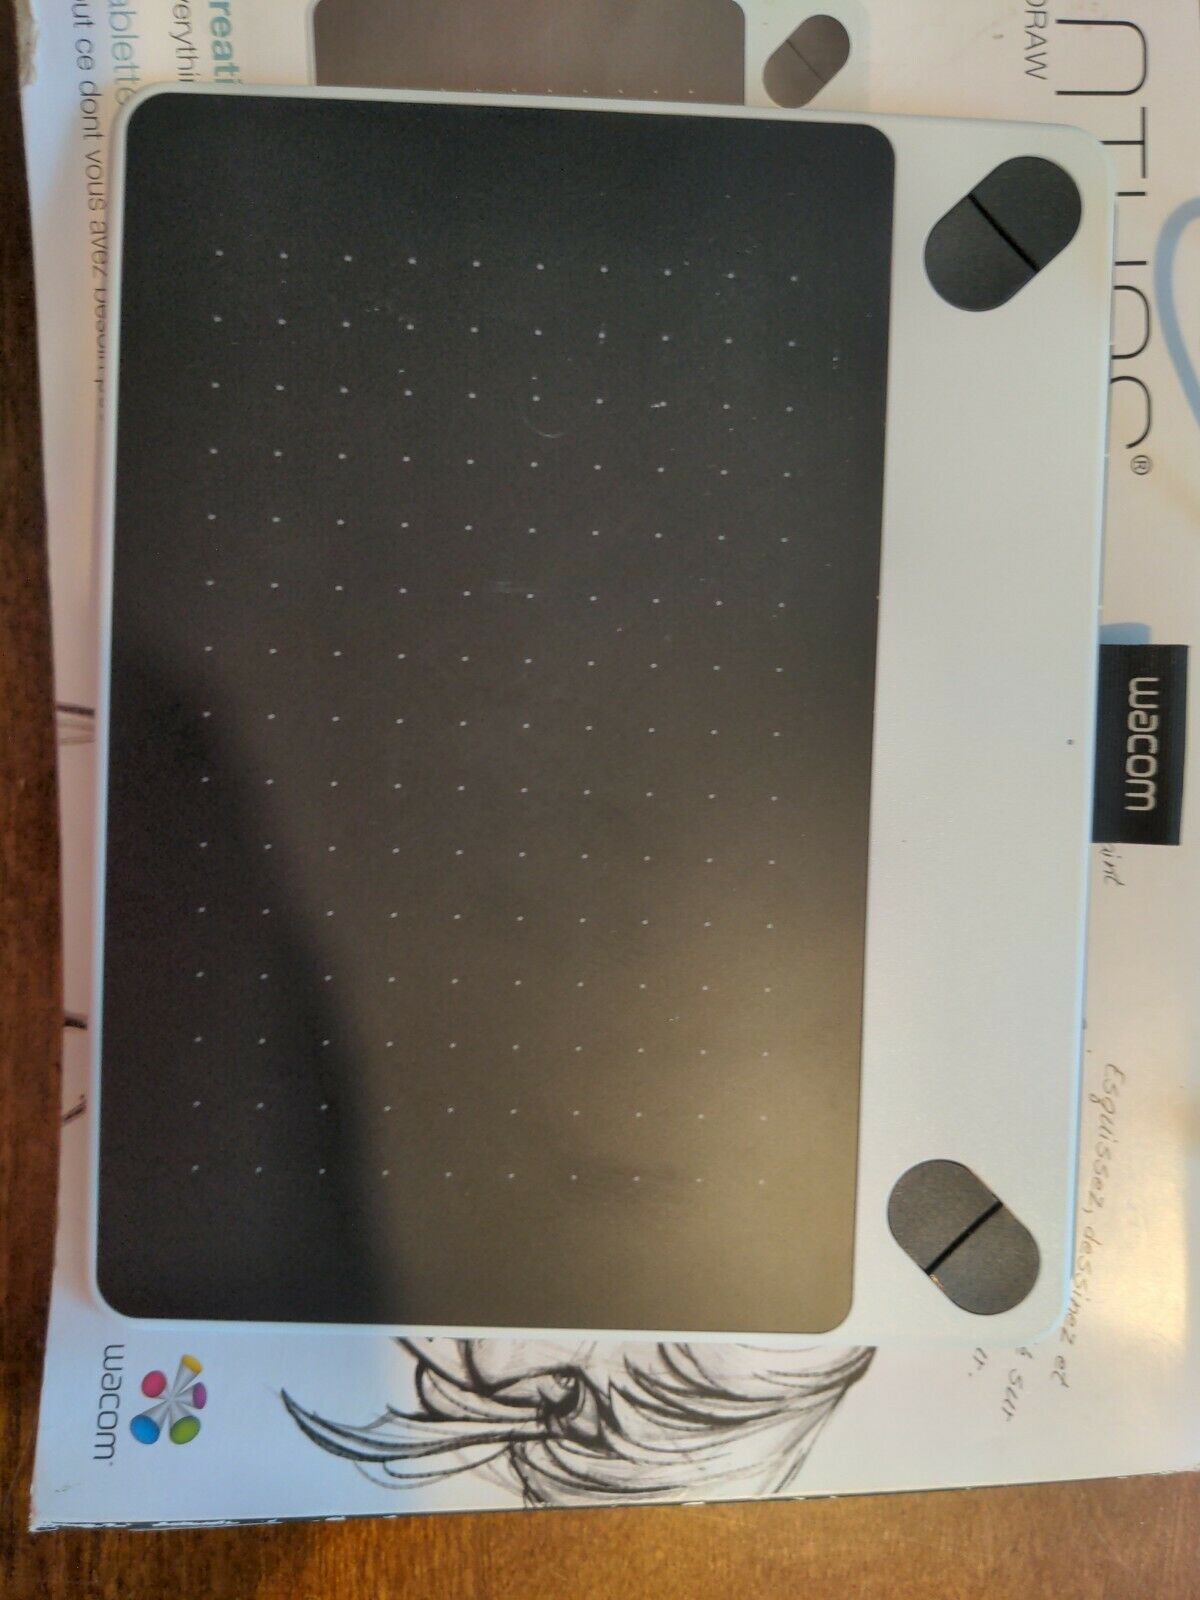 Wacom Intuos Draw CTL490 Digital Drawing and Graphics Tablet - White